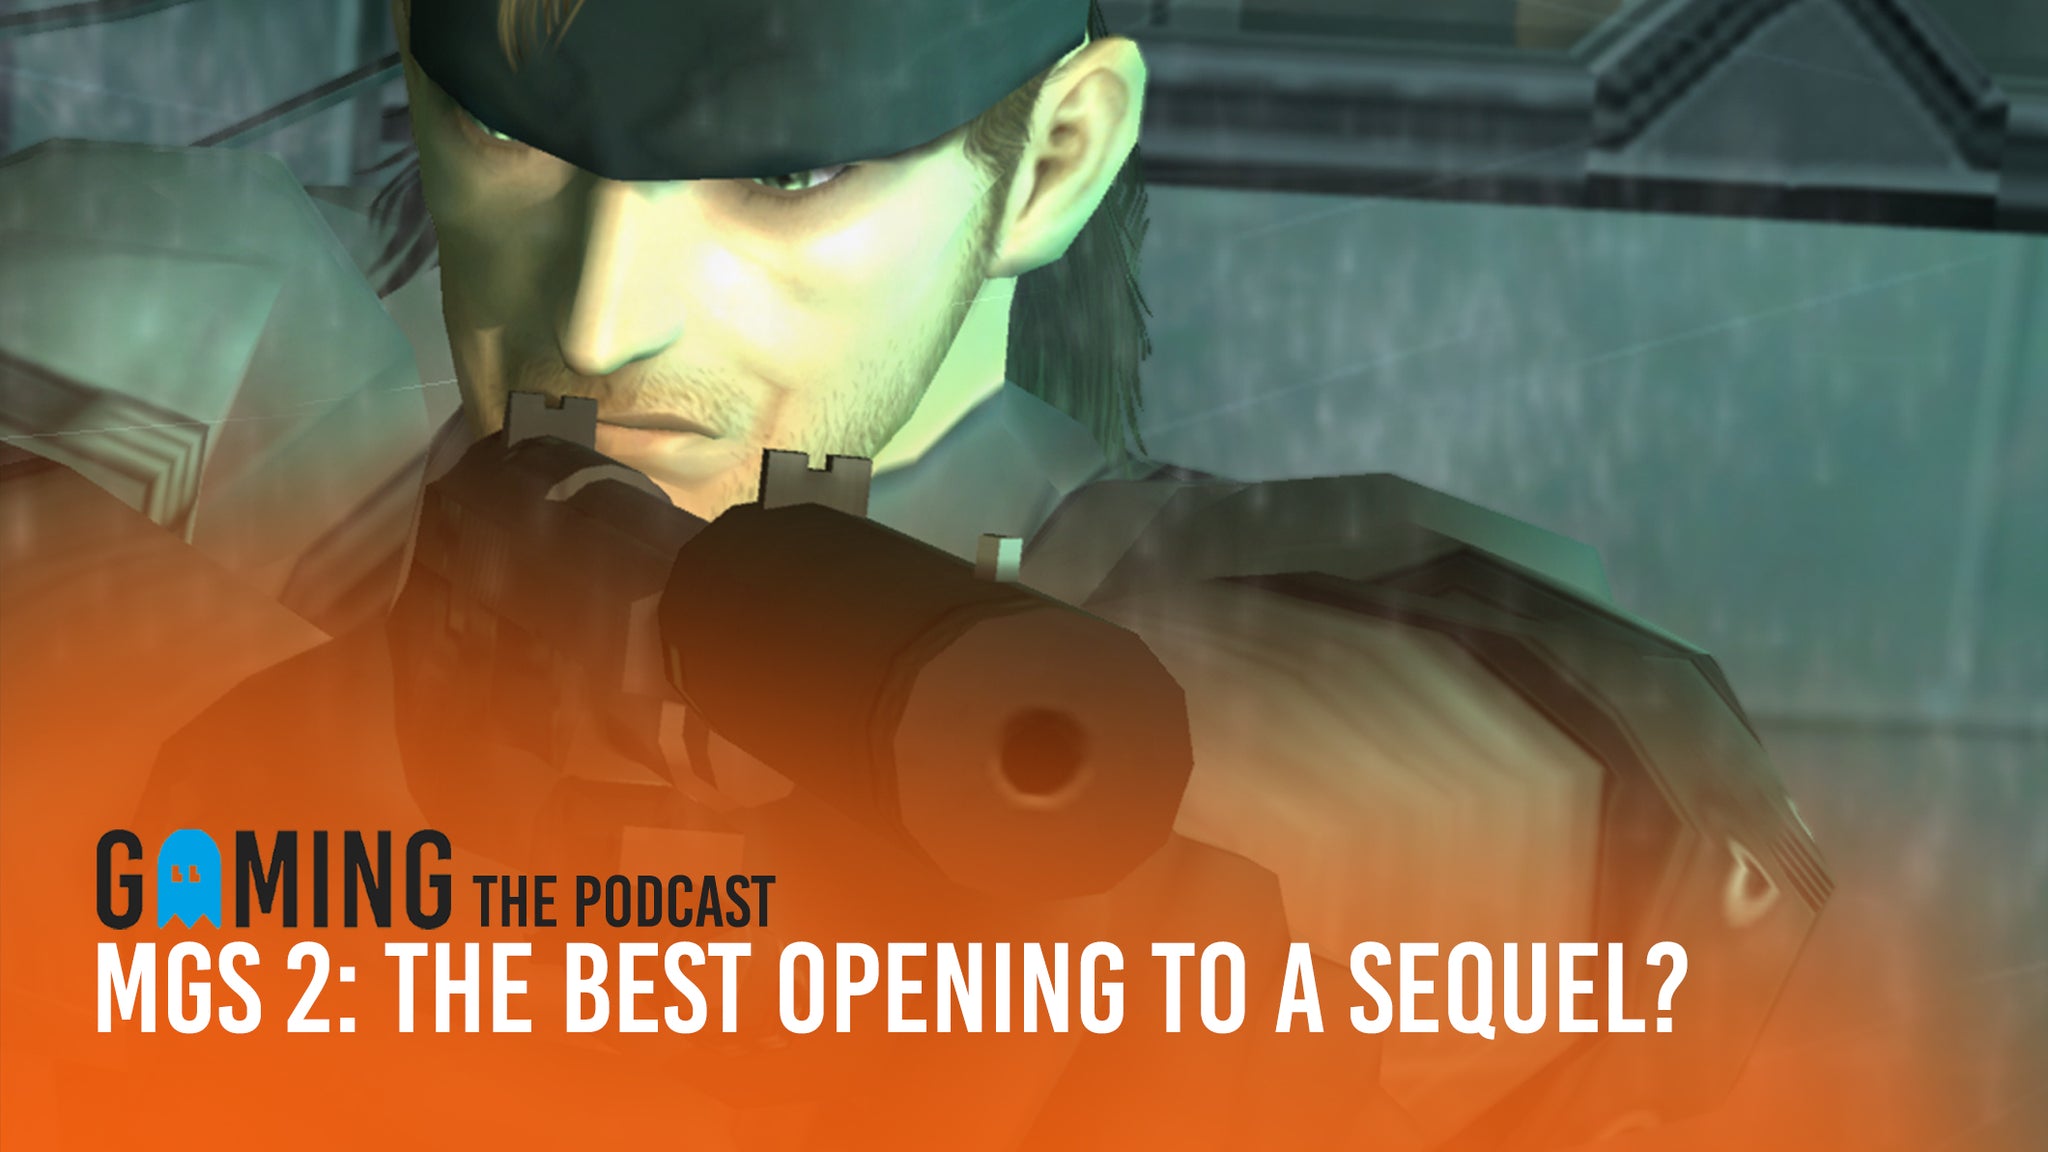 Metal Gear Solid 2's Tanker: The quintessential MGS sequence?